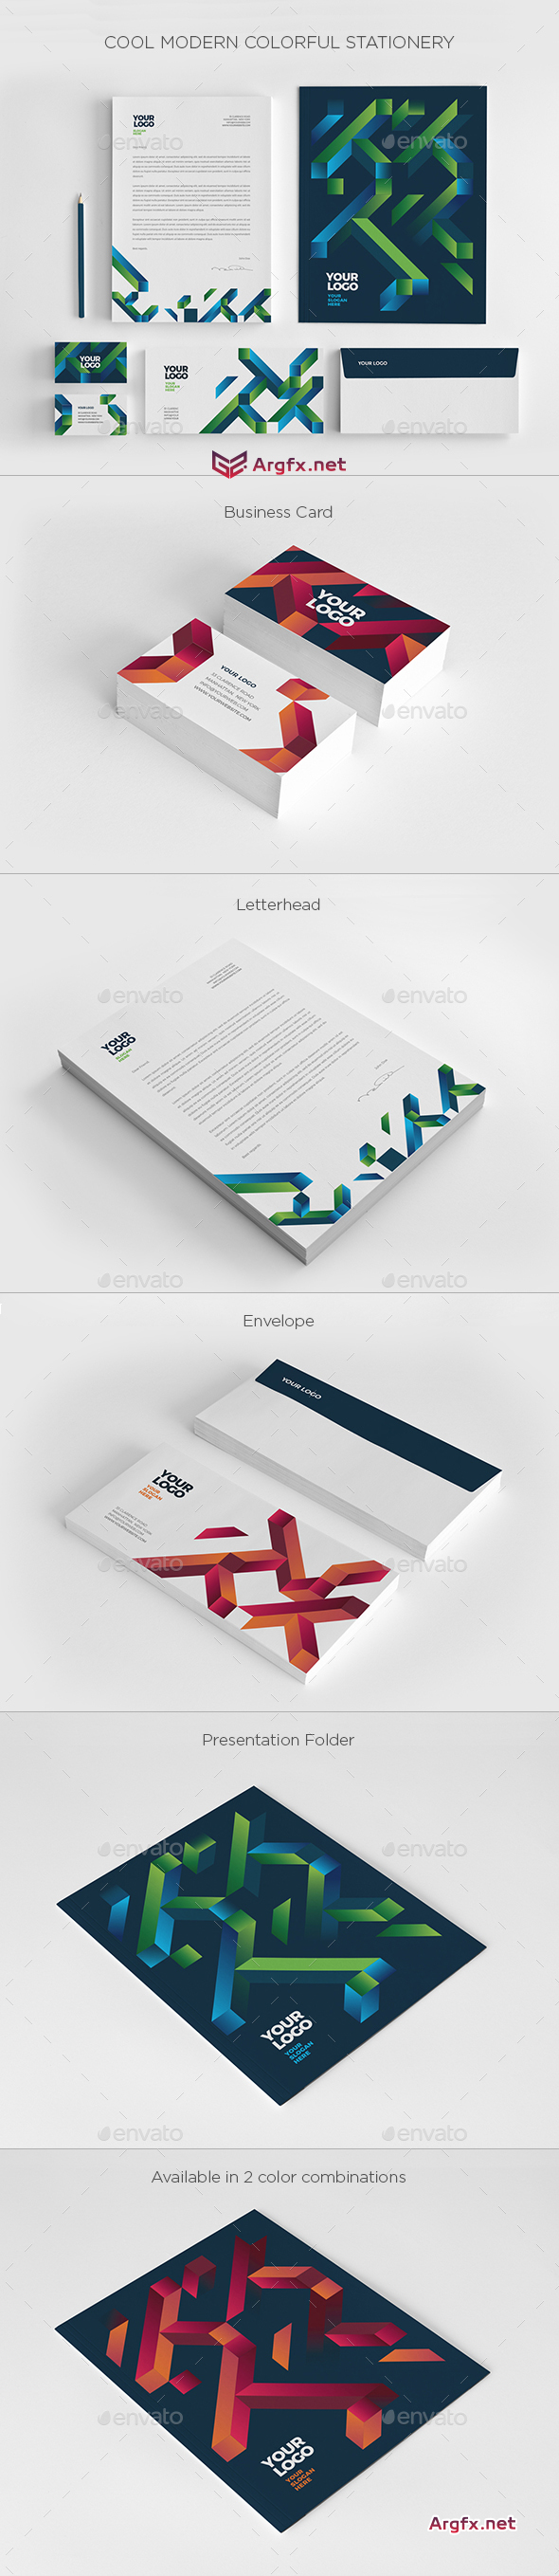  GraphicRiver - Cool Modern Colorful Stationery 19463181